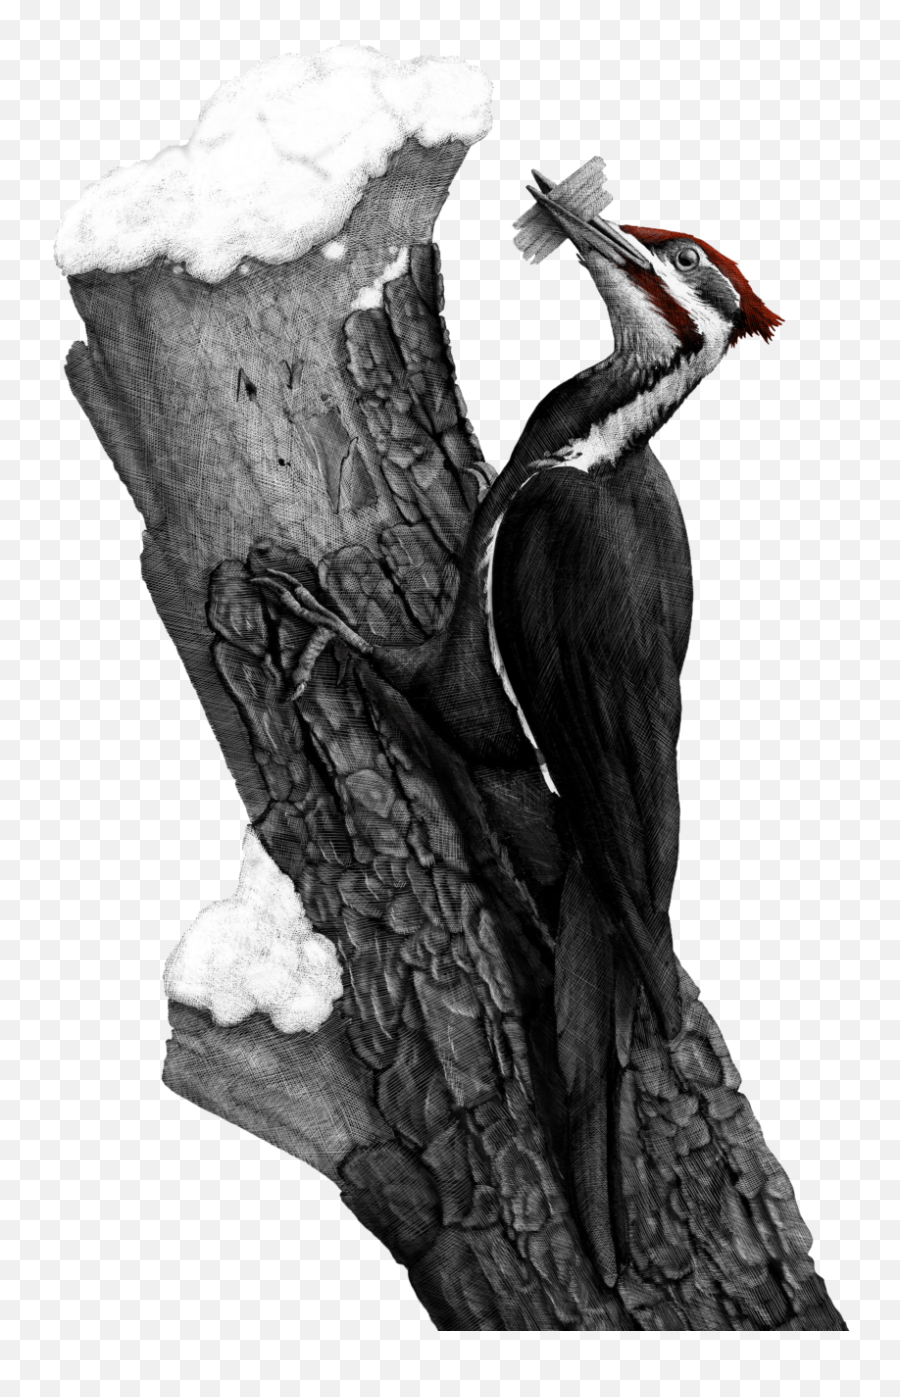 Download Pileated Woodpecker Png Image - Turkey,Woodpecker Png